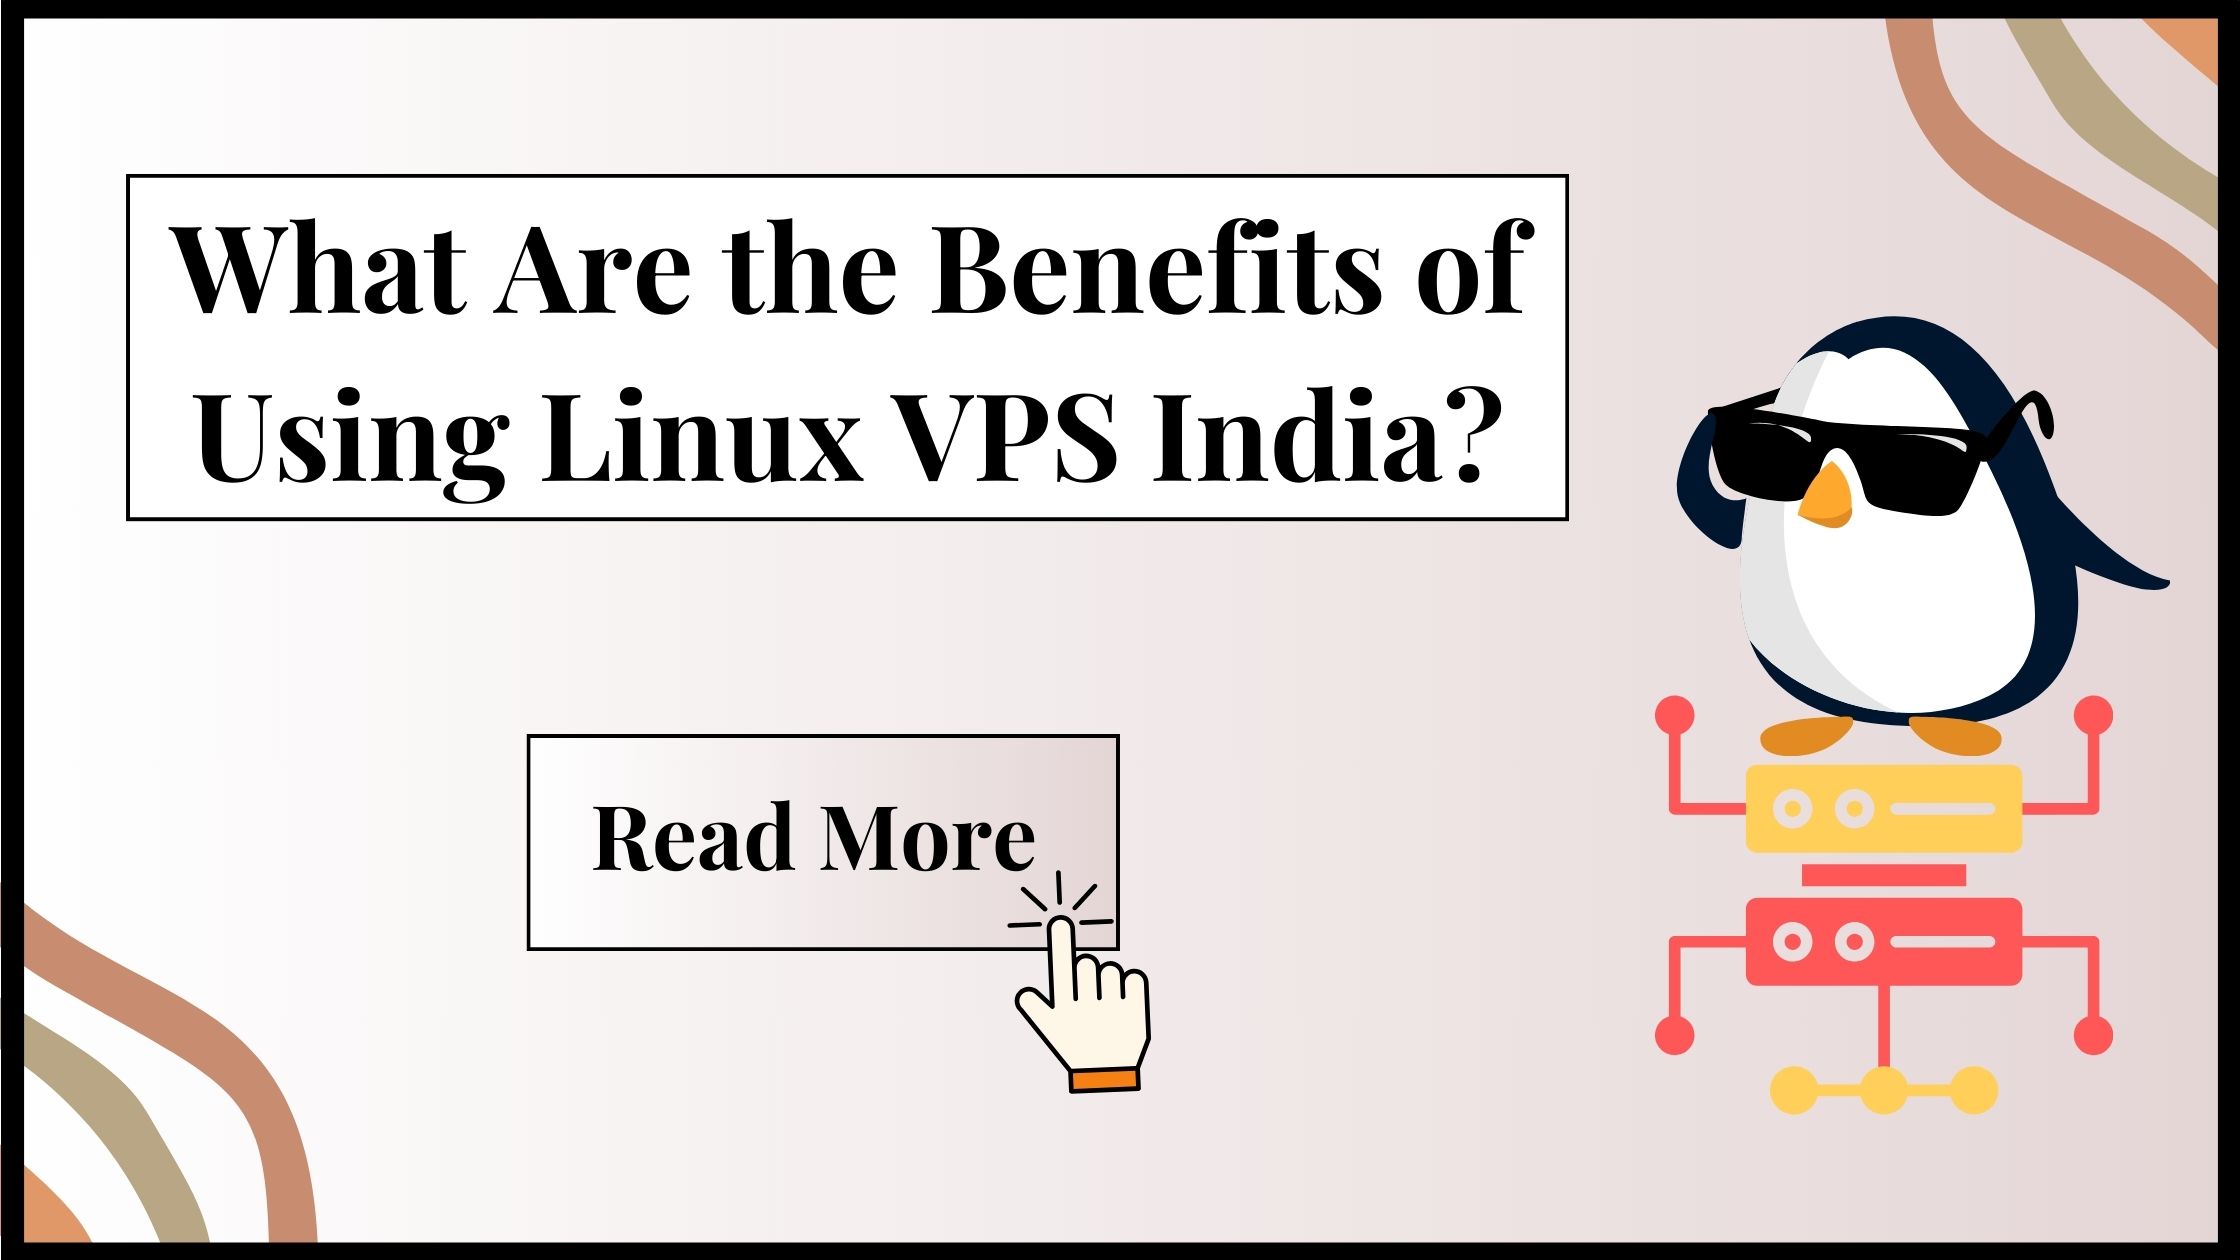 Selecting an appropriate hosting solution is essential for the success of any business. In India, Linux VPS (Virtual Private Server) has become a popular choice among businesses for their hosting requirements. This blog will outline the advantages of using Linux VPS India, explained in straightforward language for easy comprehension.